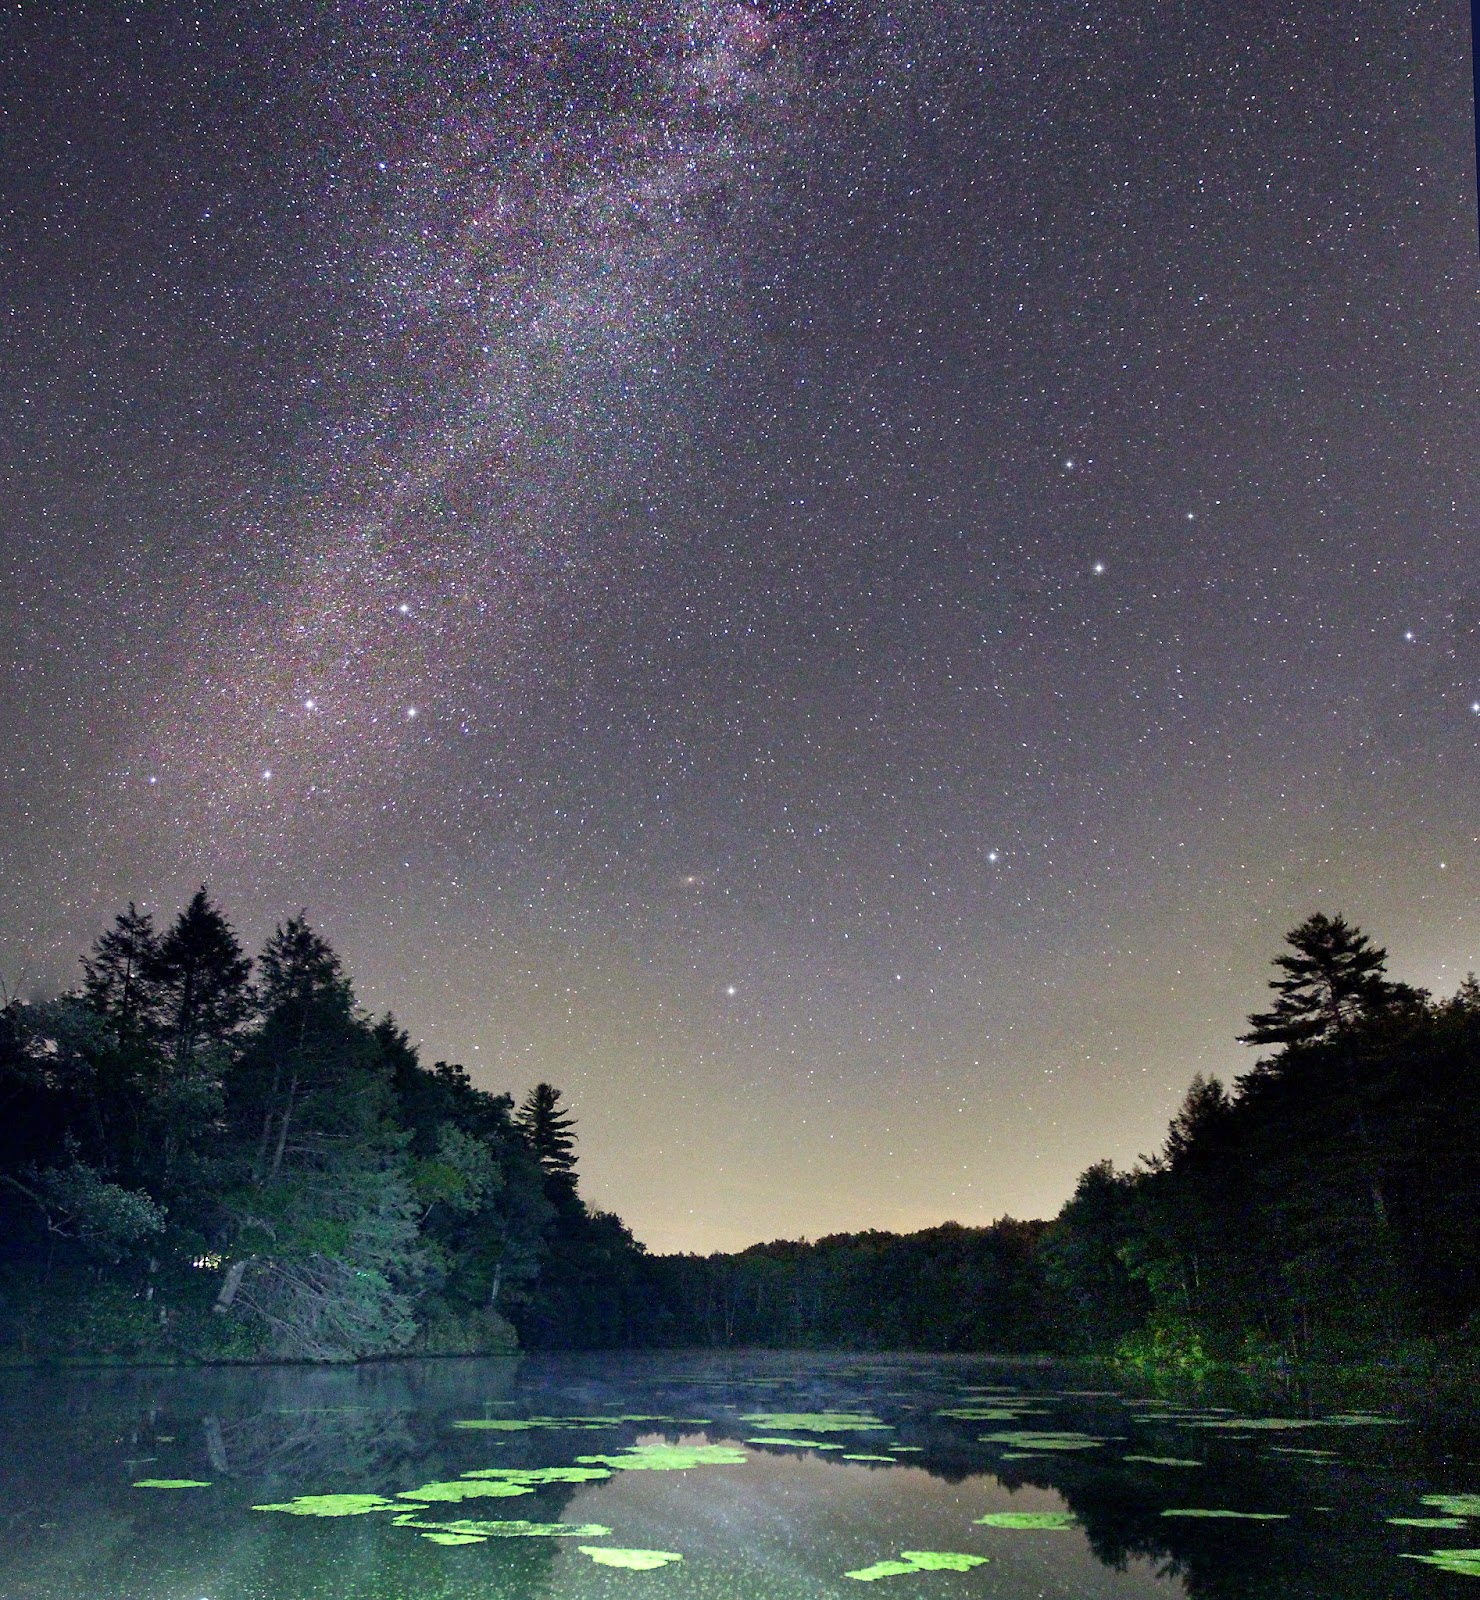 Astrophotography Blog: Milky way over lake and star reflection